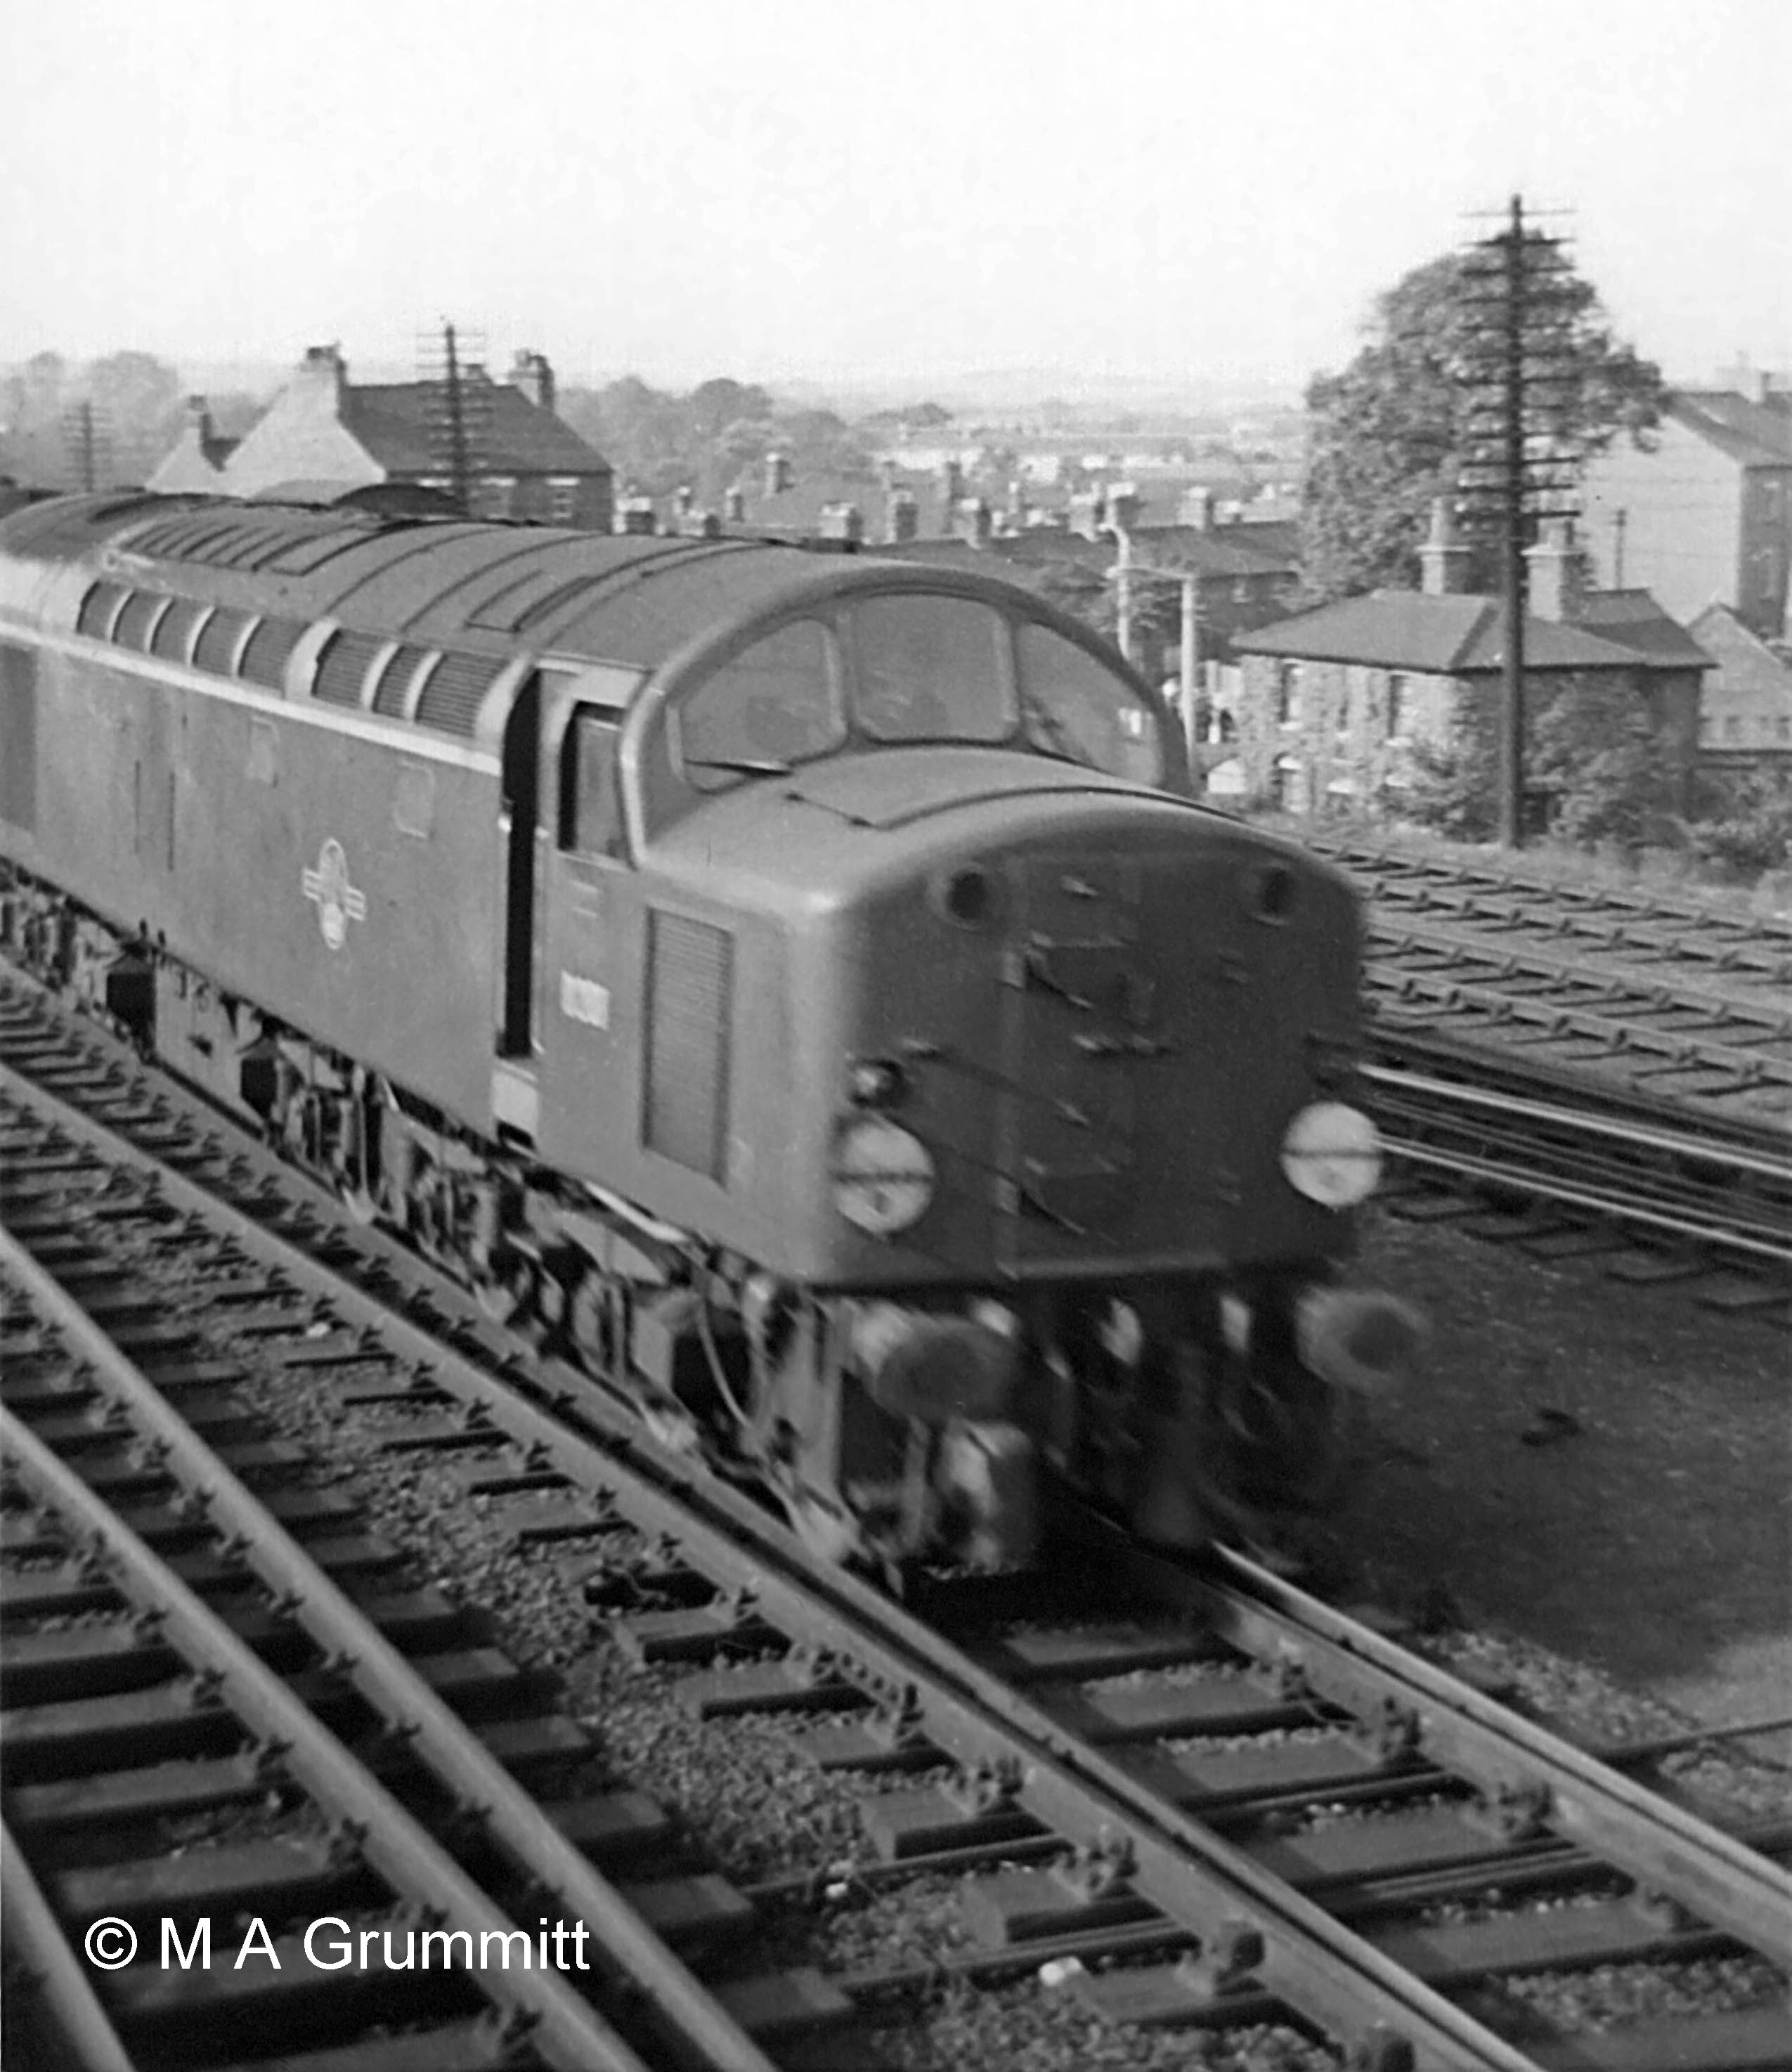 English Electric Type 4 (later Class 40) No. D208 heads south on the Up Main line. It is hauling an express passenger train, denoted by the two white discs, one above each buffer, which for a time were the equivalent of the headlamps used on steam locomotives. Photograph by Mick Grummitt.